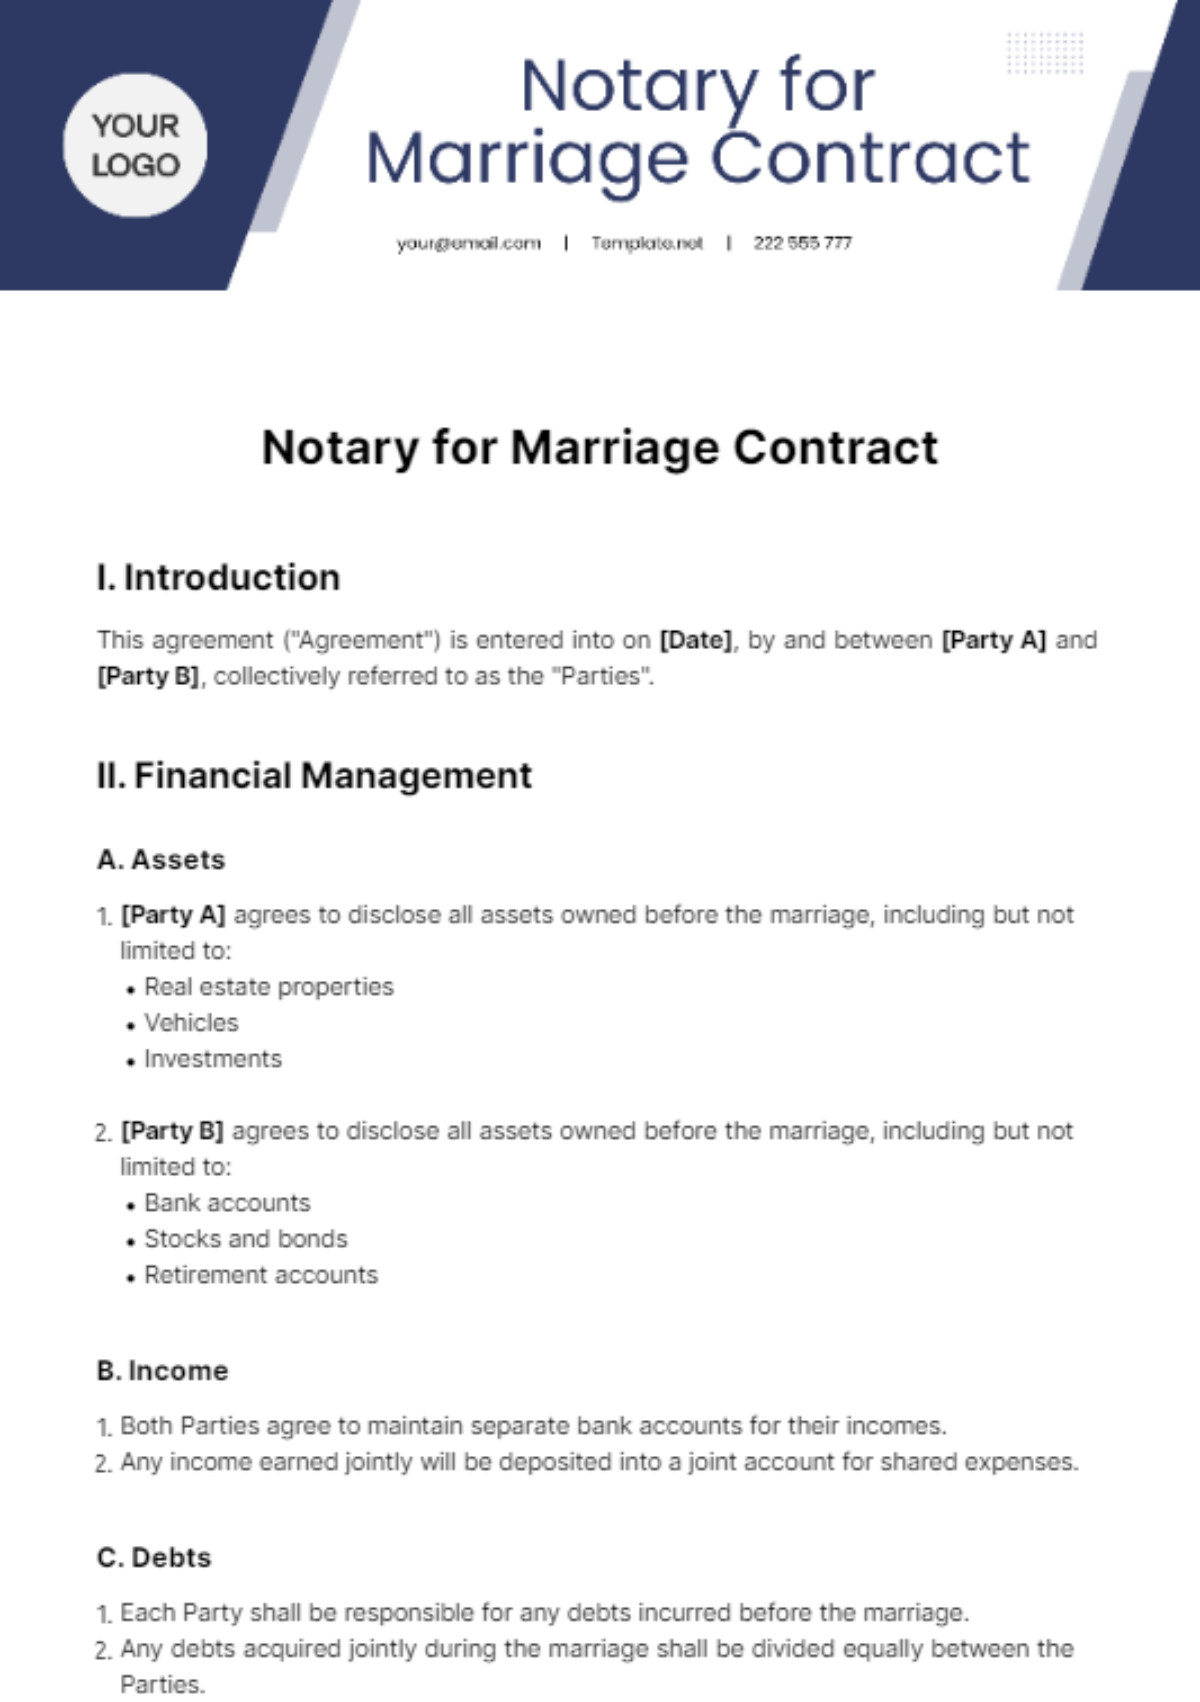 Notary for Marriage Contract Template